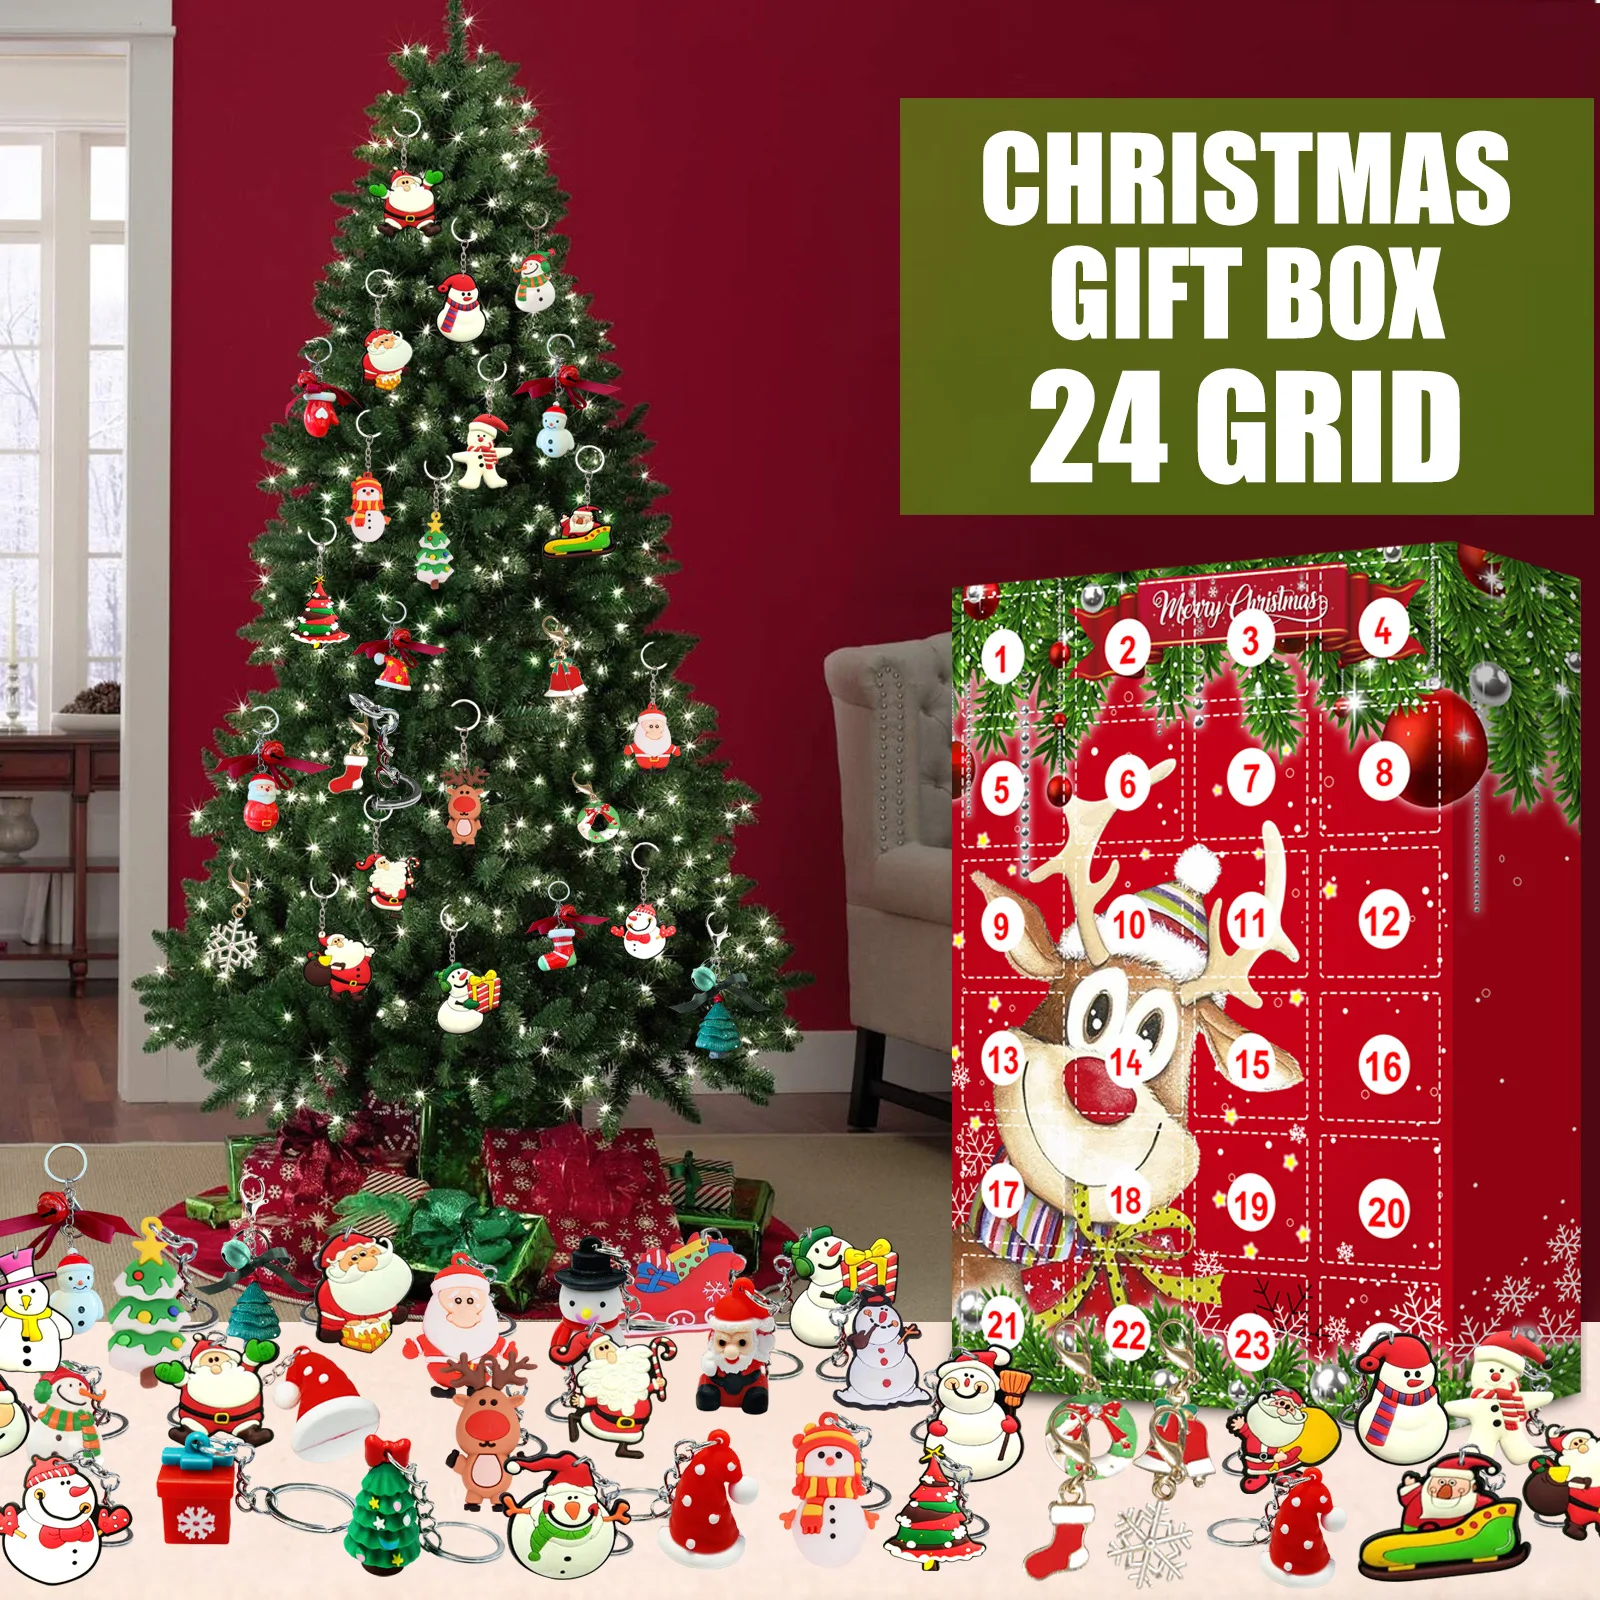 New Design Christmas Gift Blind Box Decorations Supplies Calendar 24PCS Different Key Chains Surprised Box For Kids